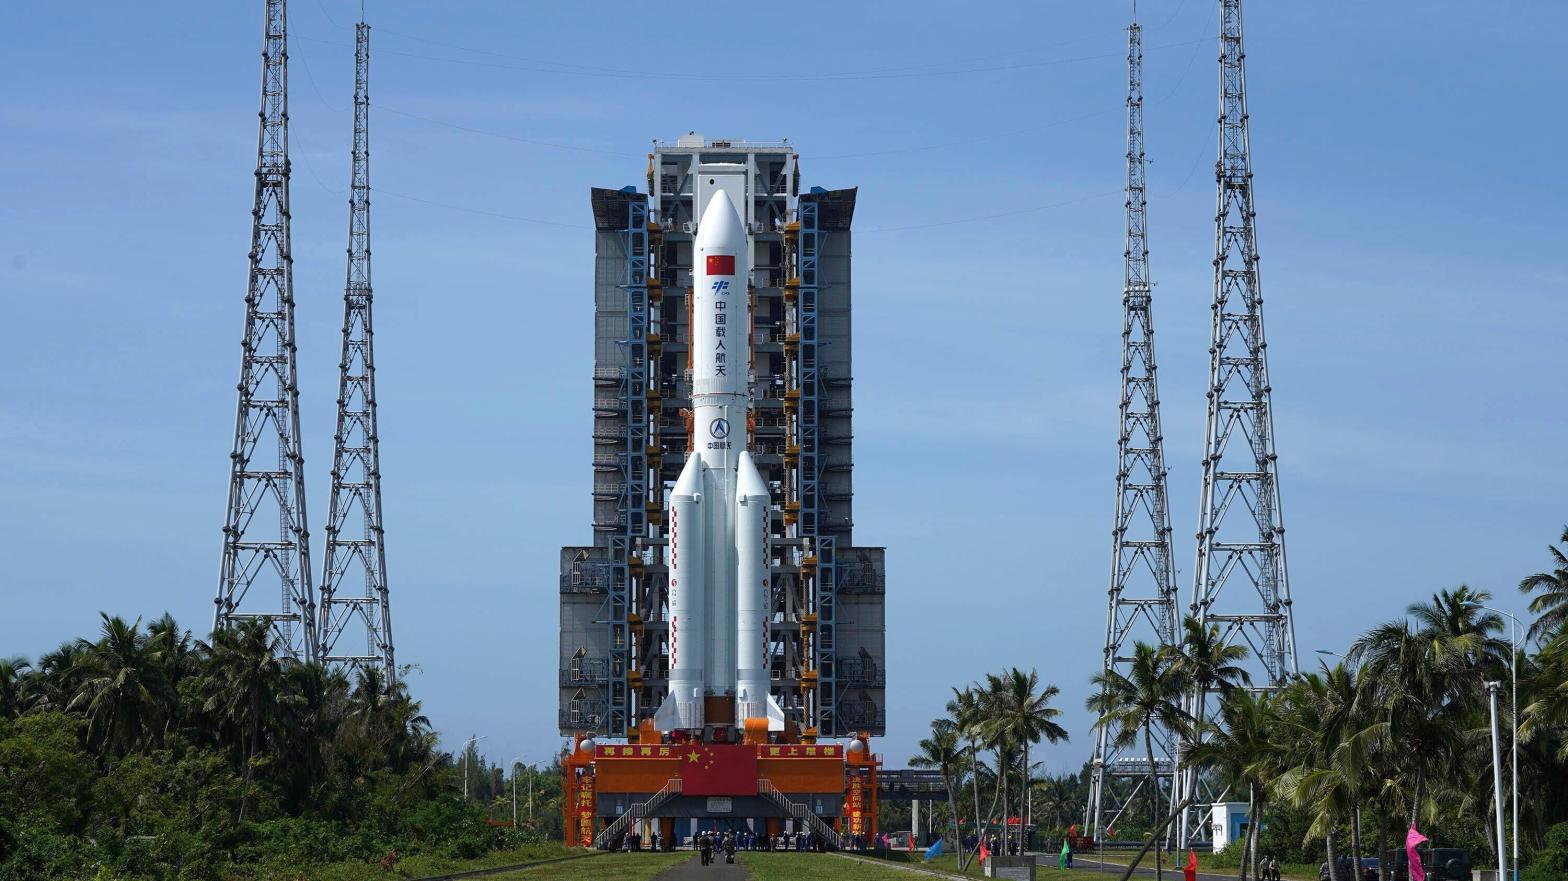 China's Long March-5B Y3 rocket carried the Wentian lab module to China's space station in July. (Photo: LIU HUAIYU, AP)